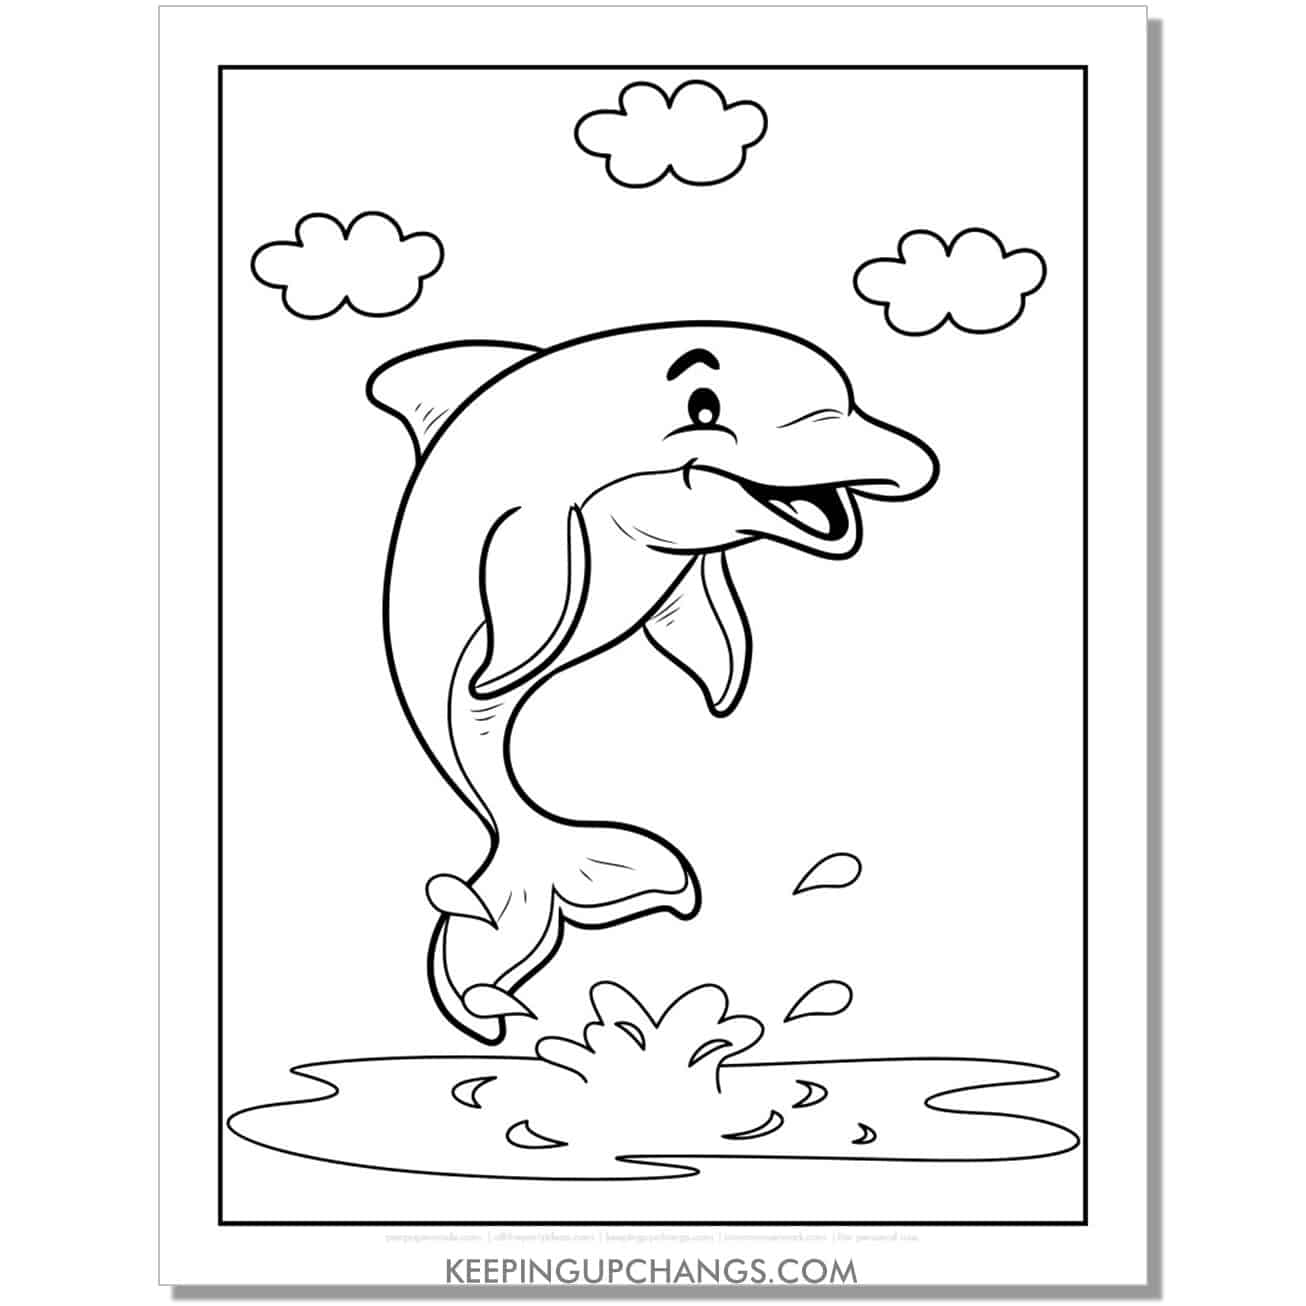 free dolphin with clouds in the sky coloring page, sheet.